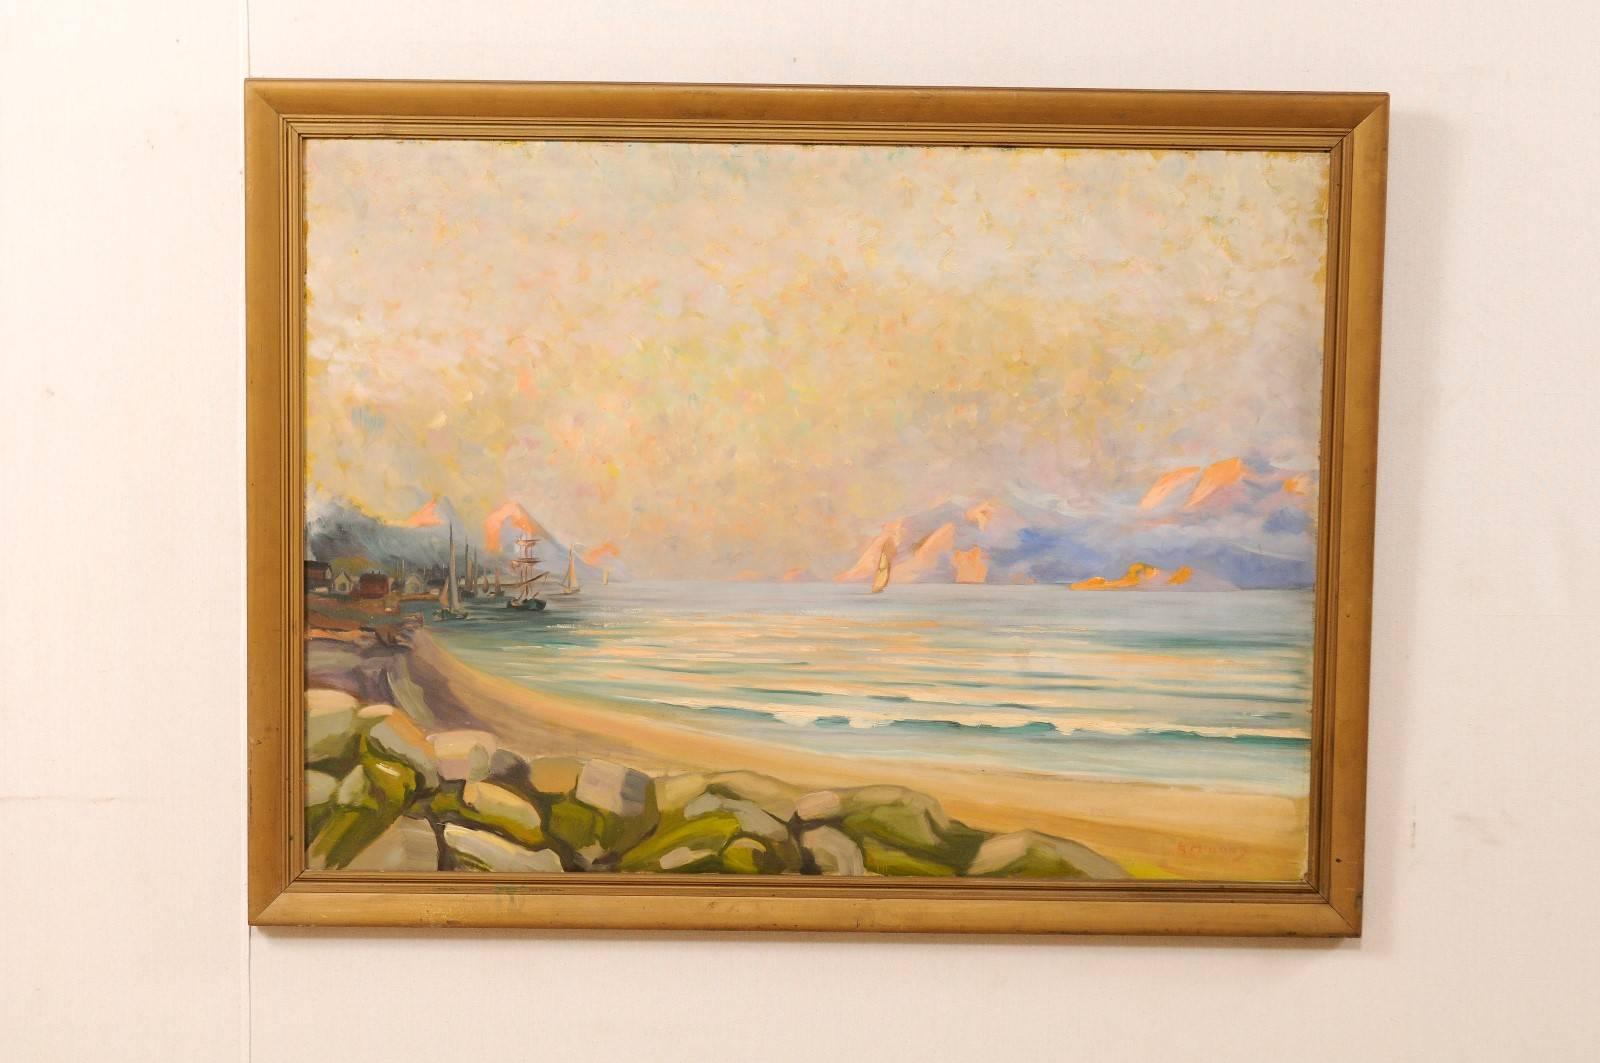 A vintage oil painting of the Swedish seaside. This mid-20th century Swedish landscape painting depicts the coast of a small fishing village, sailboats in the sea, with mountains in the distance. This piece features shades of blues, yellows, oranges